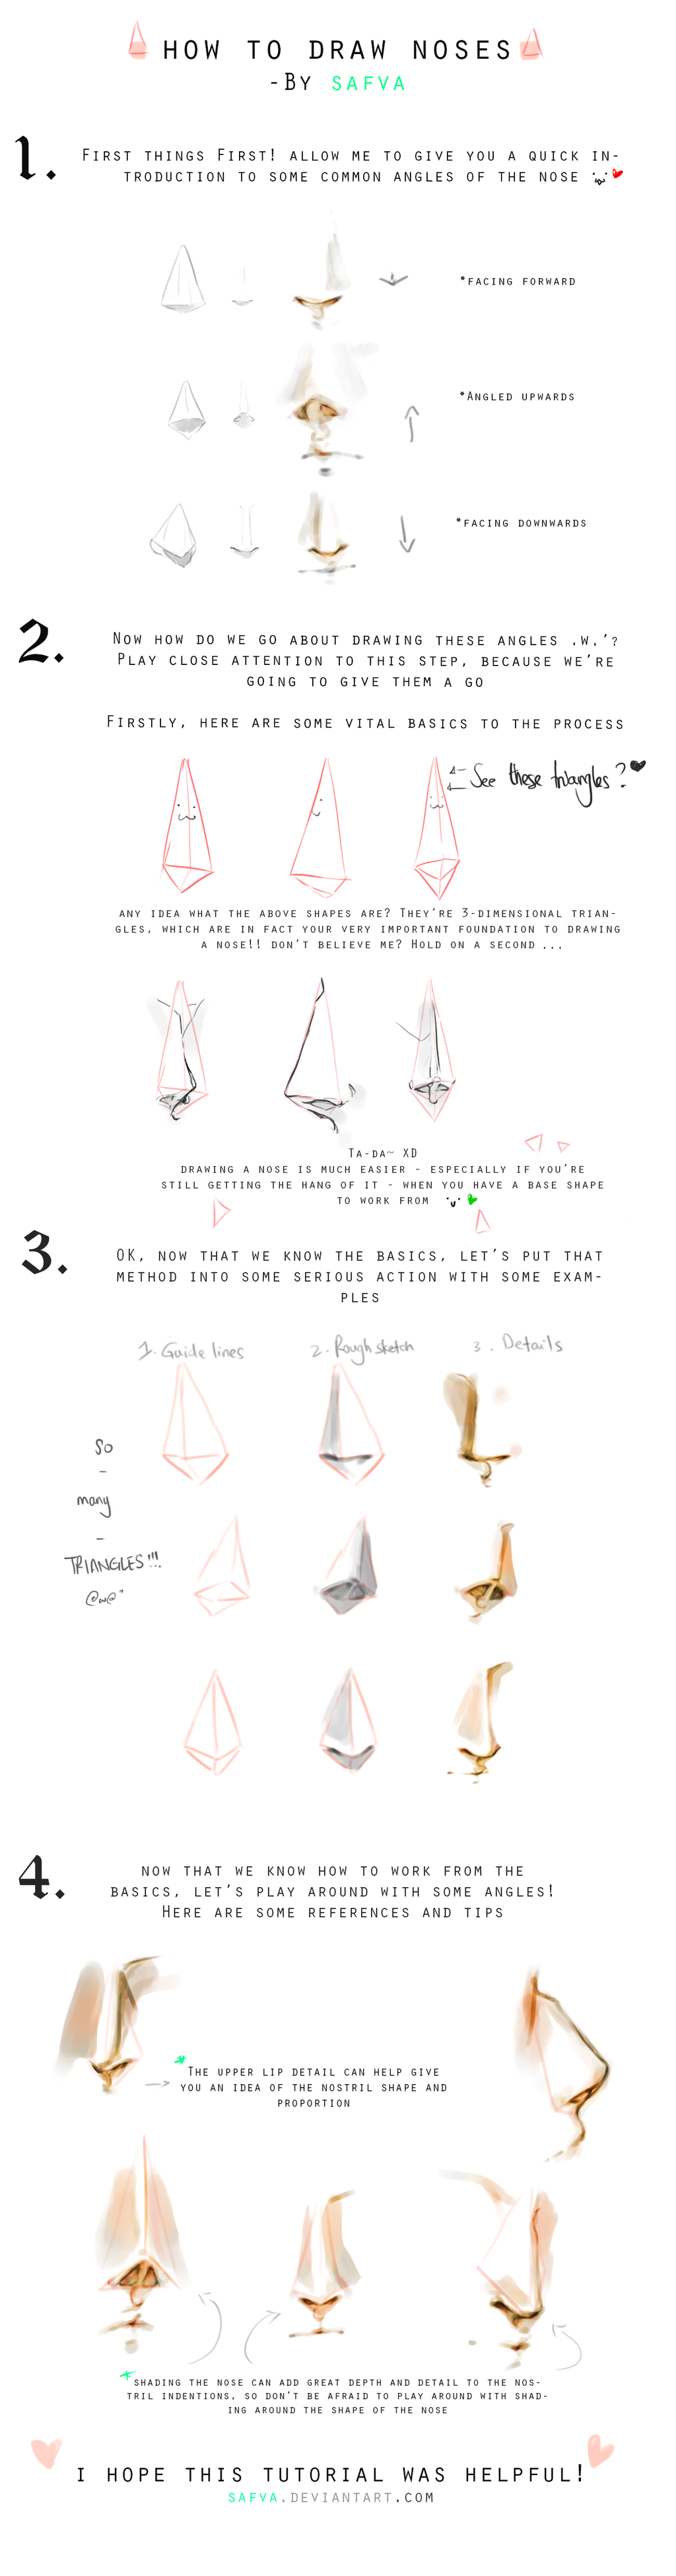 How to draw noses